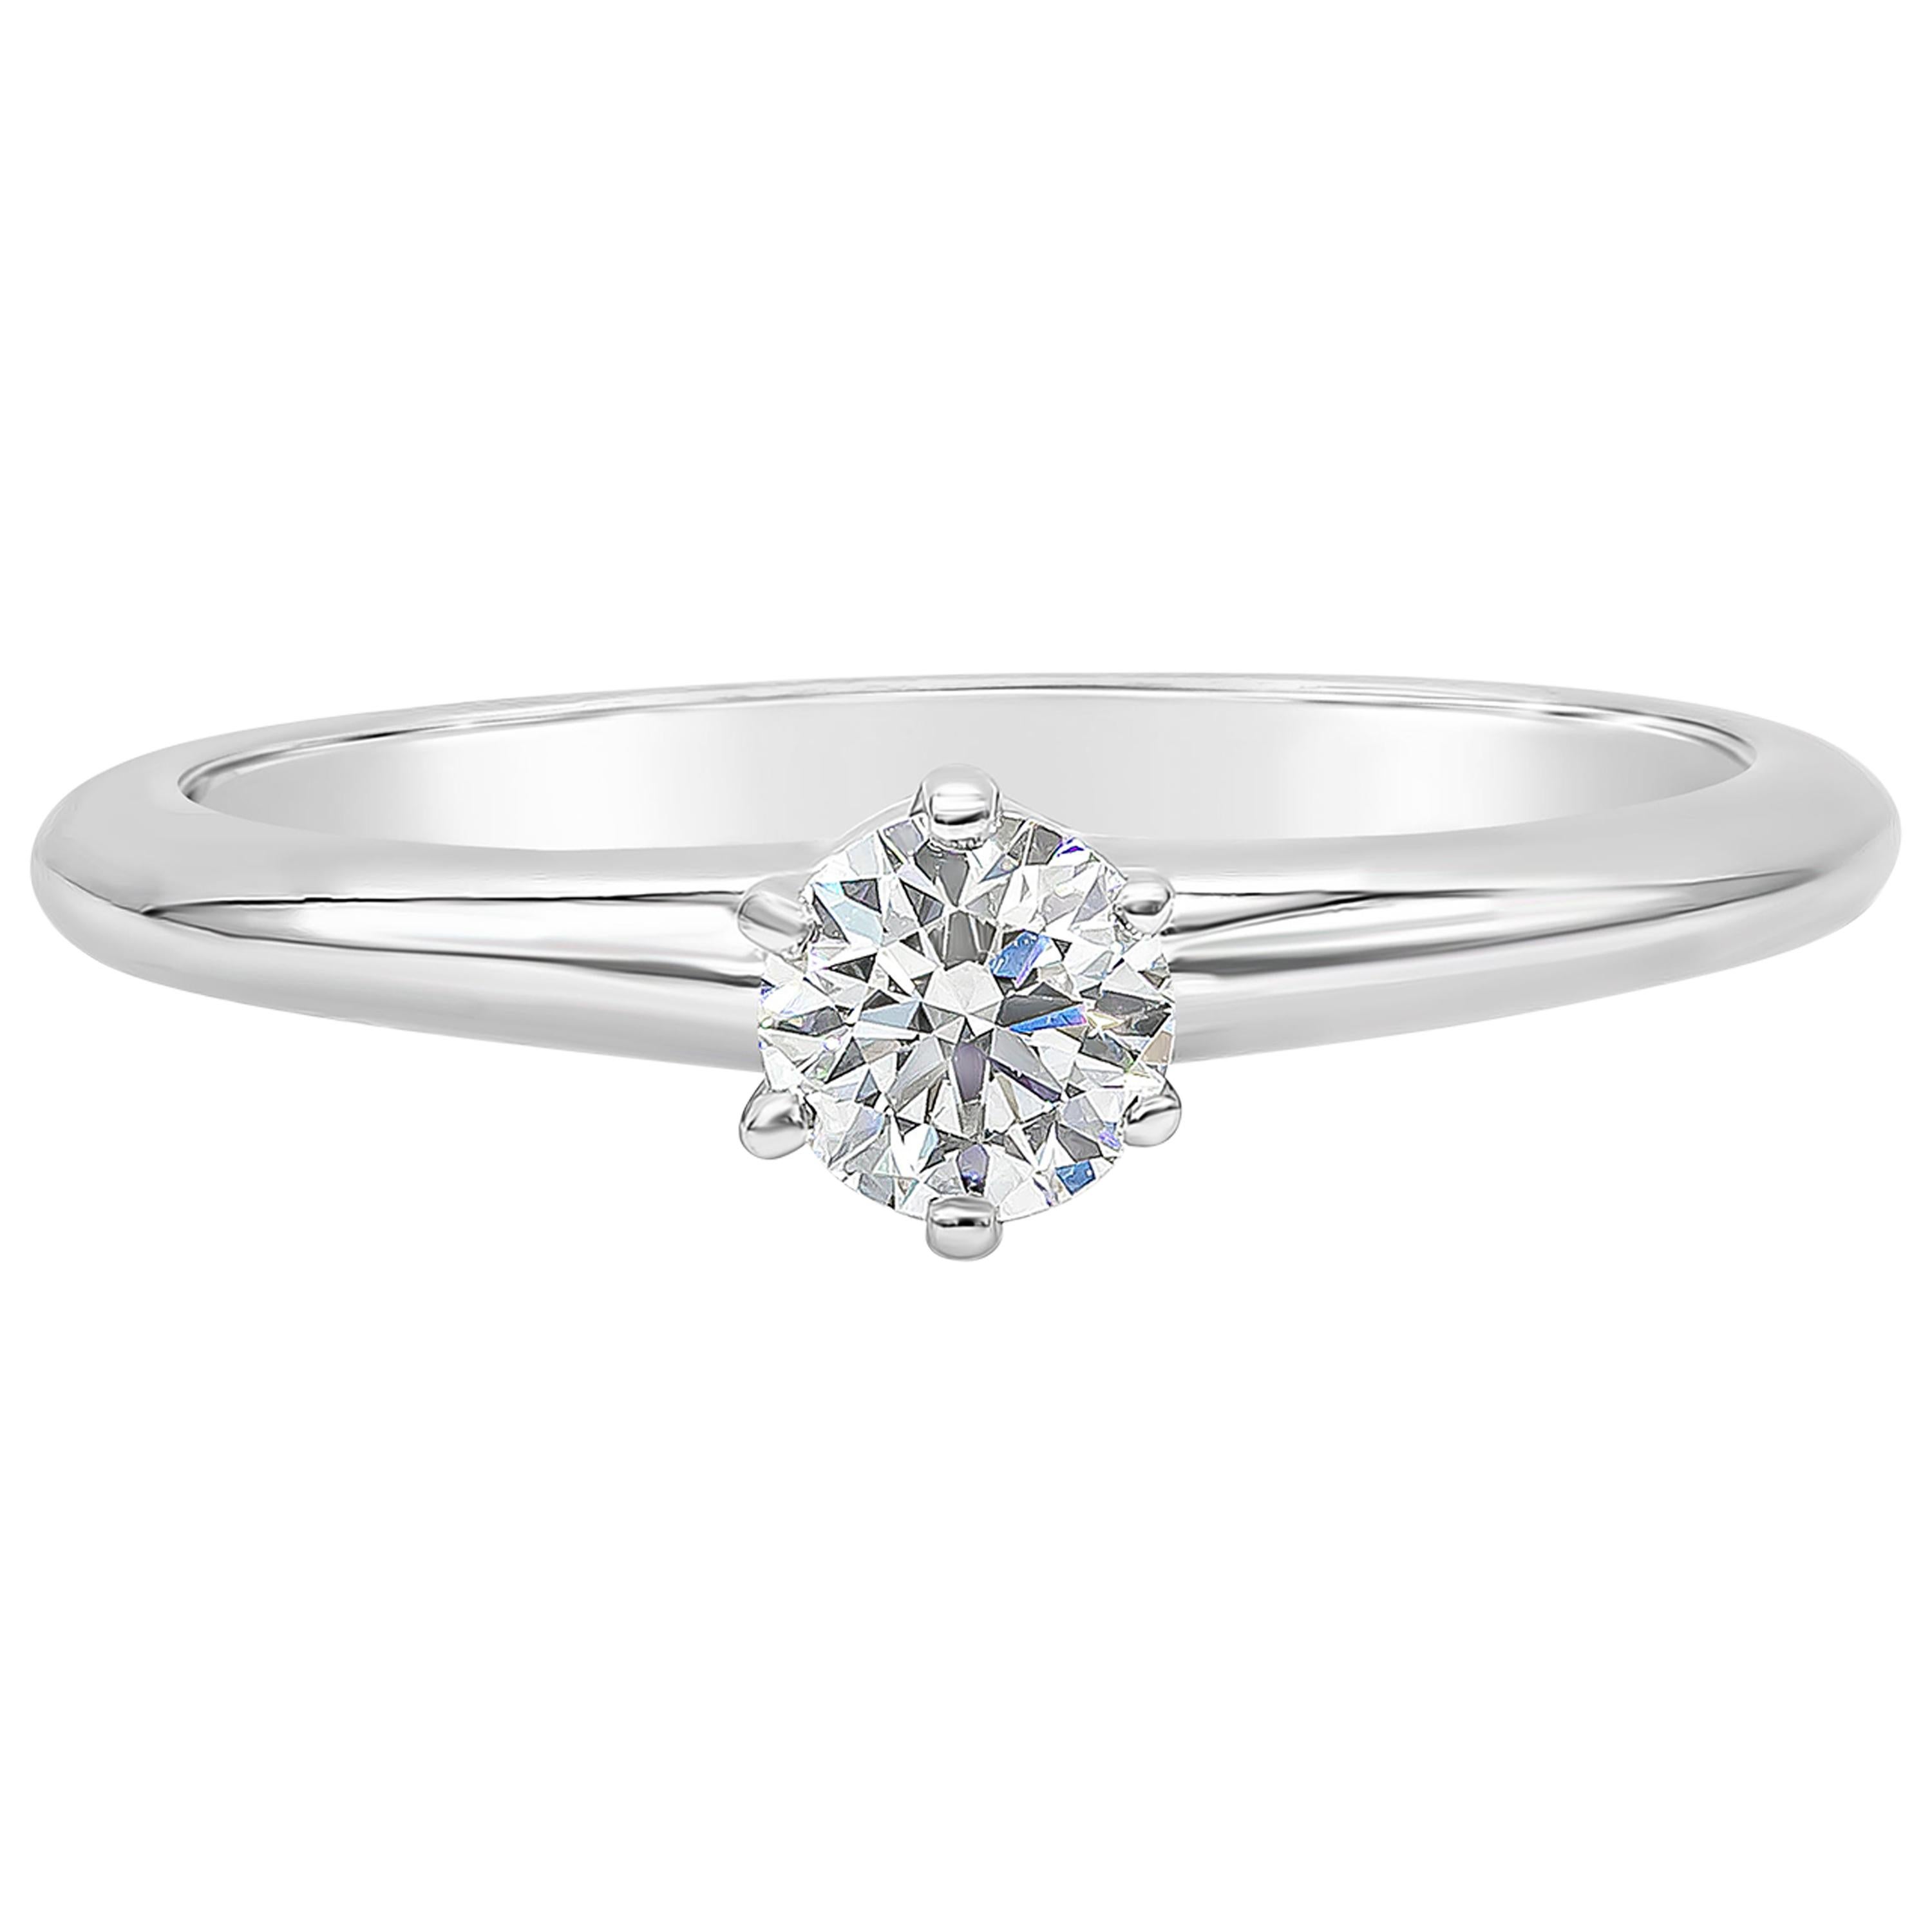 Tiffany and Co. 0.31 Carat Round Diamond Solitaire Engagement Ring For Sale  at 1stDibs | 0.31 carat diamond, "tiffany solitaire engagement ring", 0.31  carat diamond size